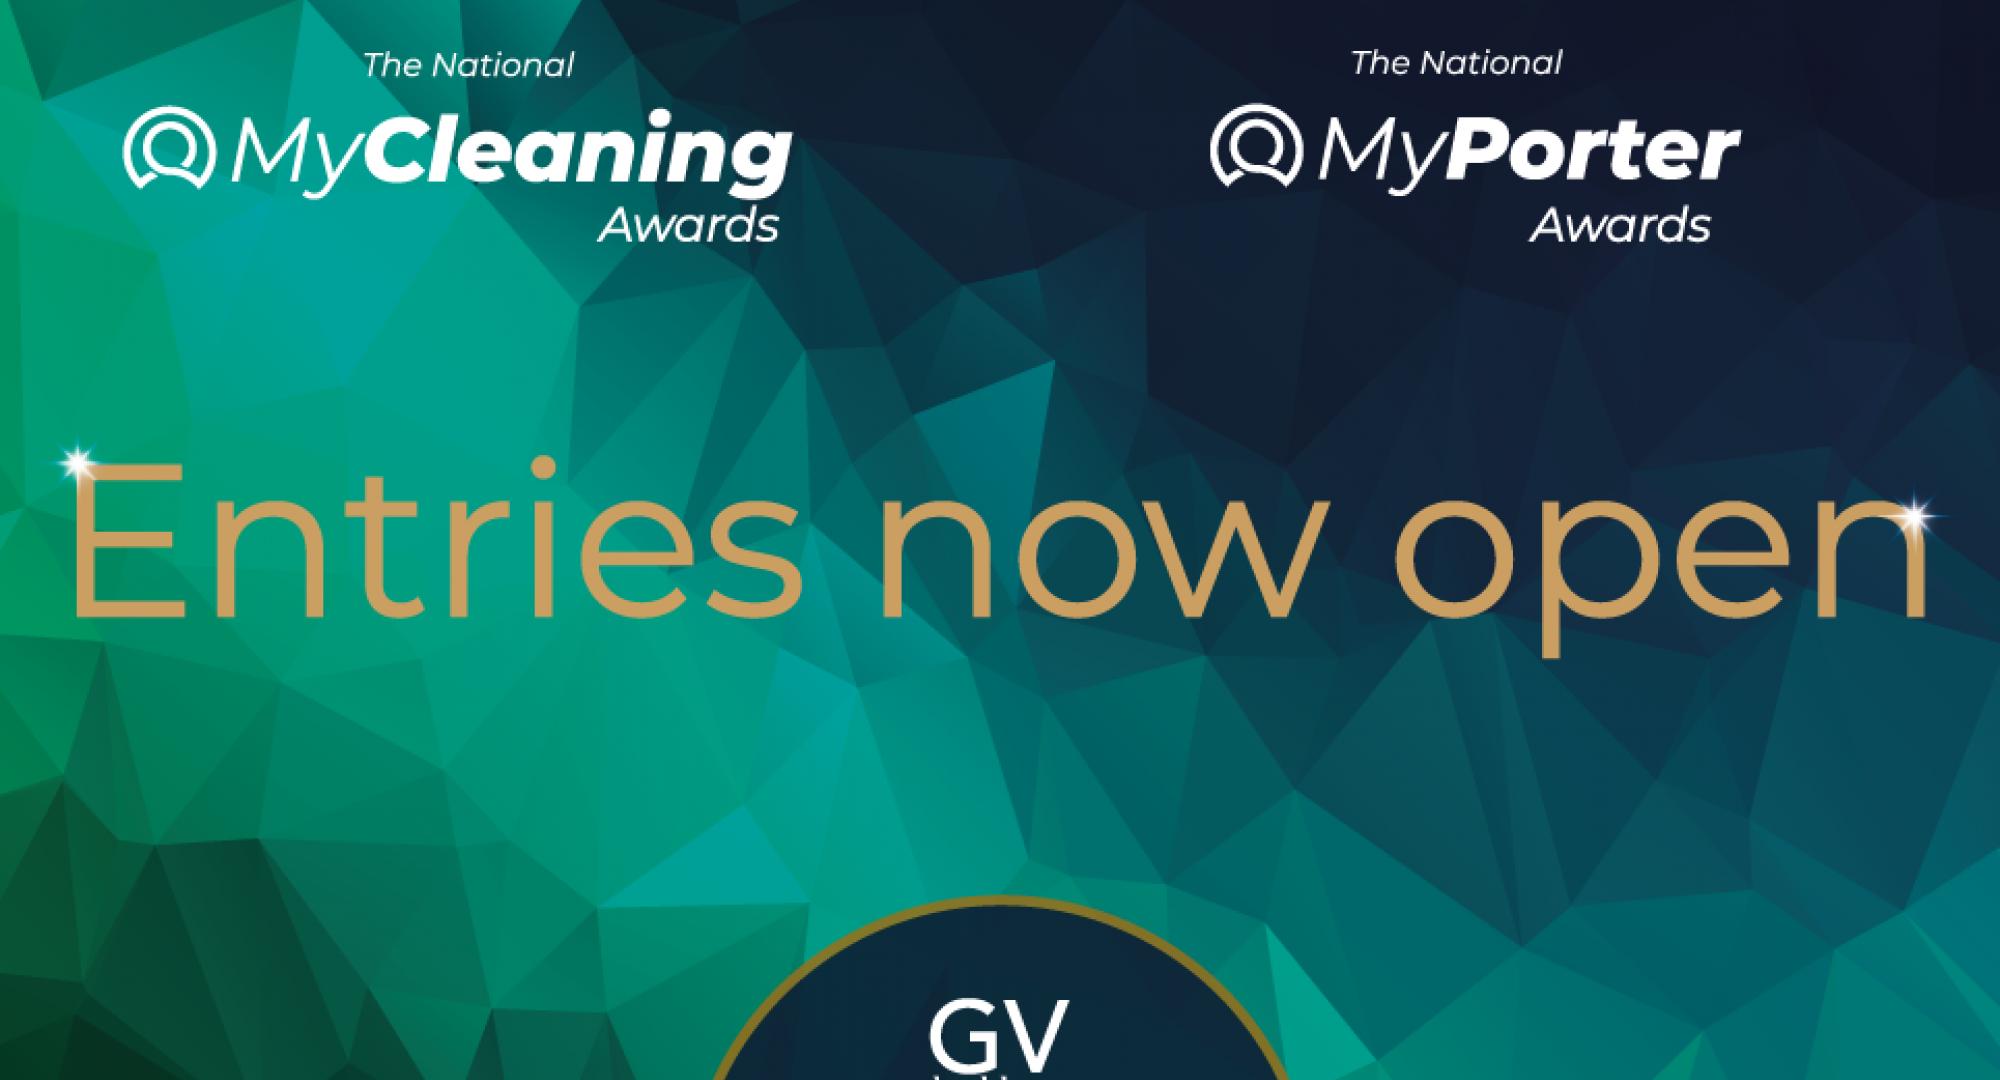 MyCleaning and MyPortering awards